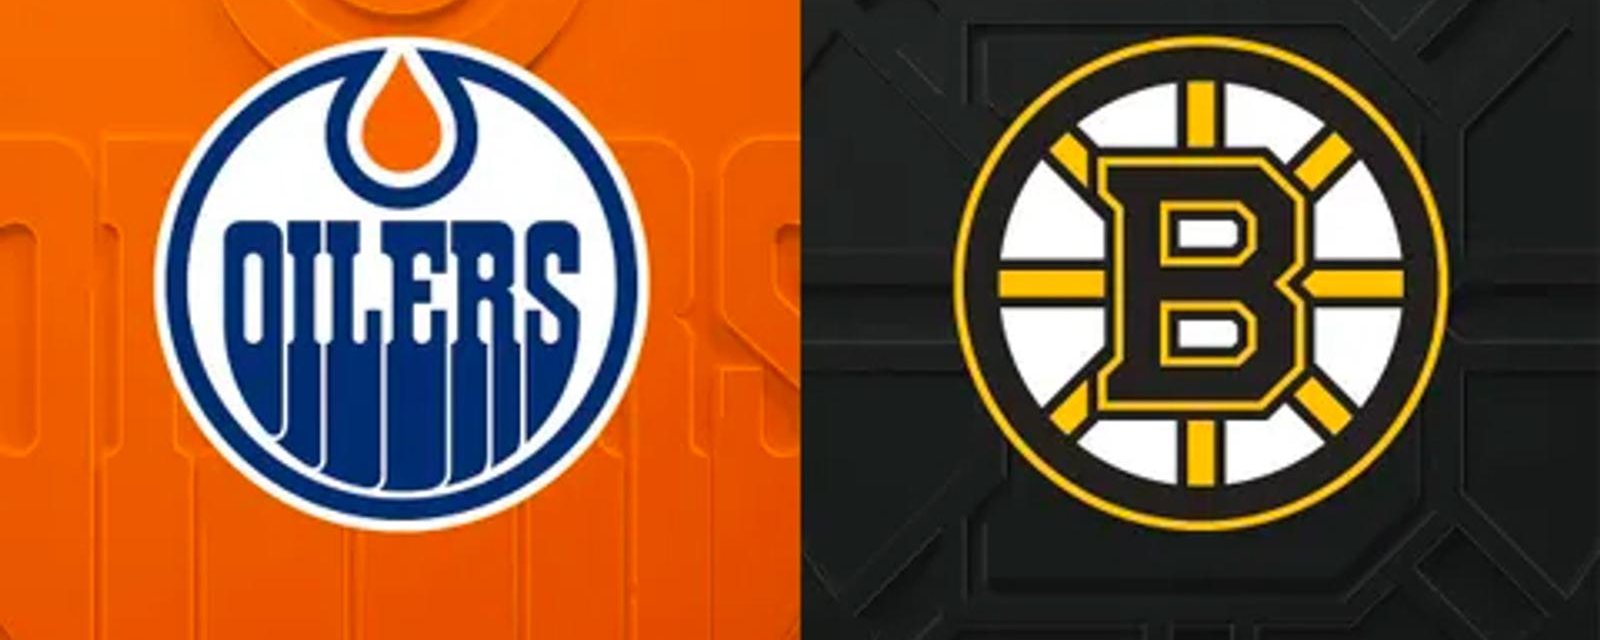 Huge scenario emerges linking Oilers and Bruins for perfect trade!